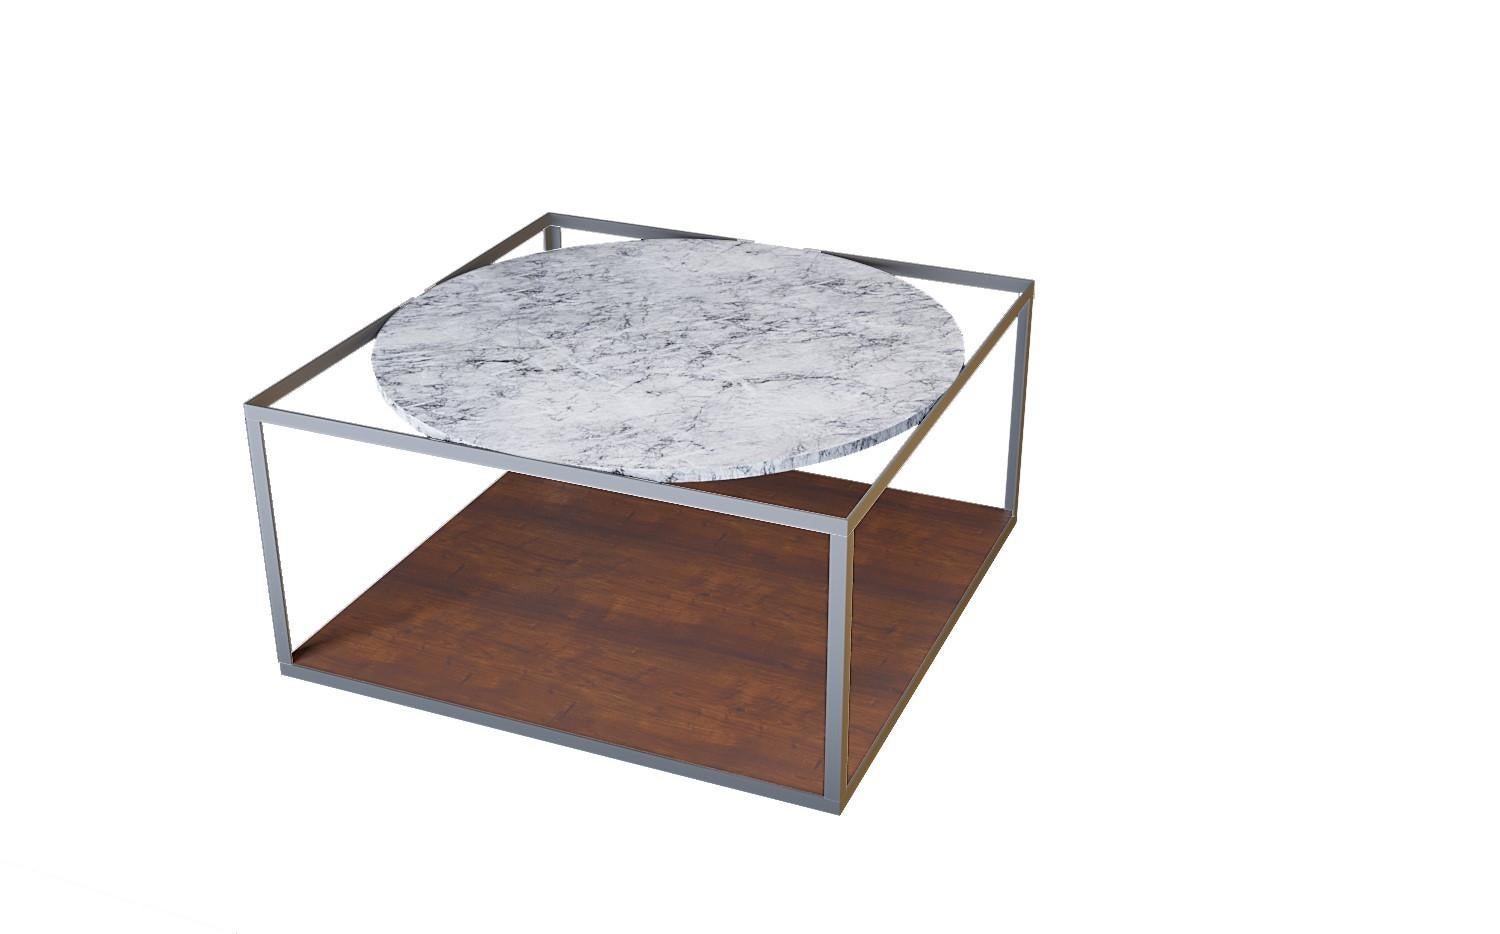 𝗣𝗿𝗼𝗱𝘂𝗰𝘁 𝗗𝗲𝘁𝗮𝗶𝗹𝘀:
NORDST GAARD Square Shape Coffee Table from Italian White Mountain Marble, Danish Modern Design, New

Harmonious rupture between rigid frames and curved tabletops. A game of geometrical shapes designed to include and